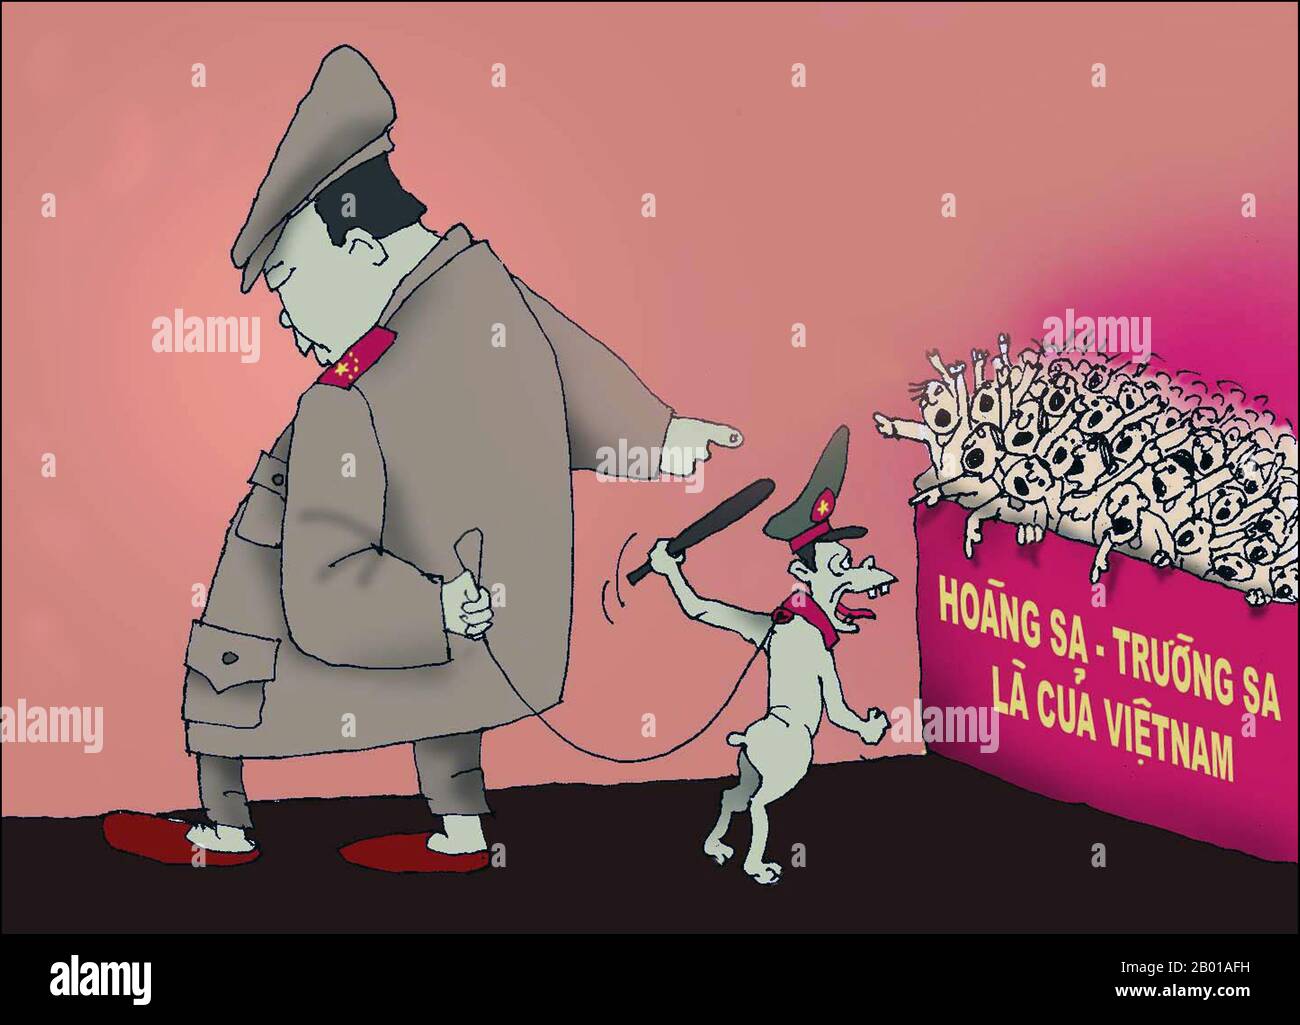 Vietnam: Cartoon shows Mao Zedong setting police attack dog on Vietnamese asserting 'The Paracels and the Spratlys Belong to Vietnam'.  The Spratlys Archipelago in the South China Sea (called by Vietnam the East Sea) is disputed in various degrees by China, Taiwan, Vietnam, Philippines, Malaysia and Brunei. The Paracels Islands are disputed between China and Vietnam, but have been controlled completely by China since 1974.  The Chinese claim is the most extensive and is generally indicated by a notional frontier termed by the Chinese the 'Nine Dotted Line' (nánhǎi jiǔduàn xiàn). Stock Photo